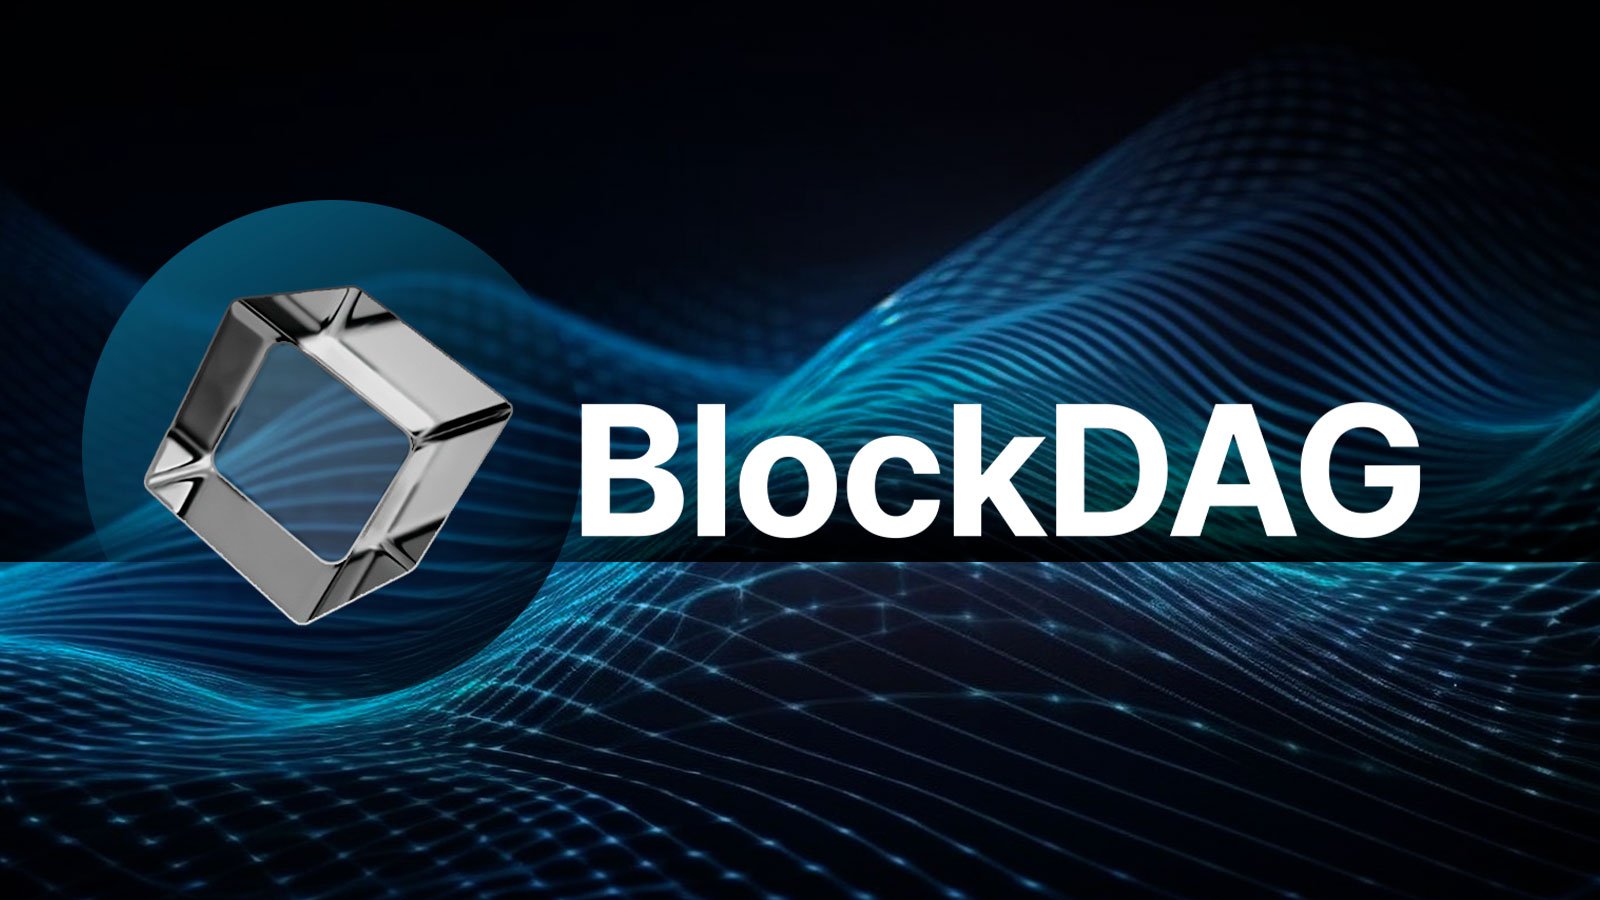 BlockDAG (BDAG) Crypto Token Sale Might be Welcoming New Cohorts of Investors in May as Solana (SOL) and Bitcoin (BTC) Major Cryptos Set New Highs